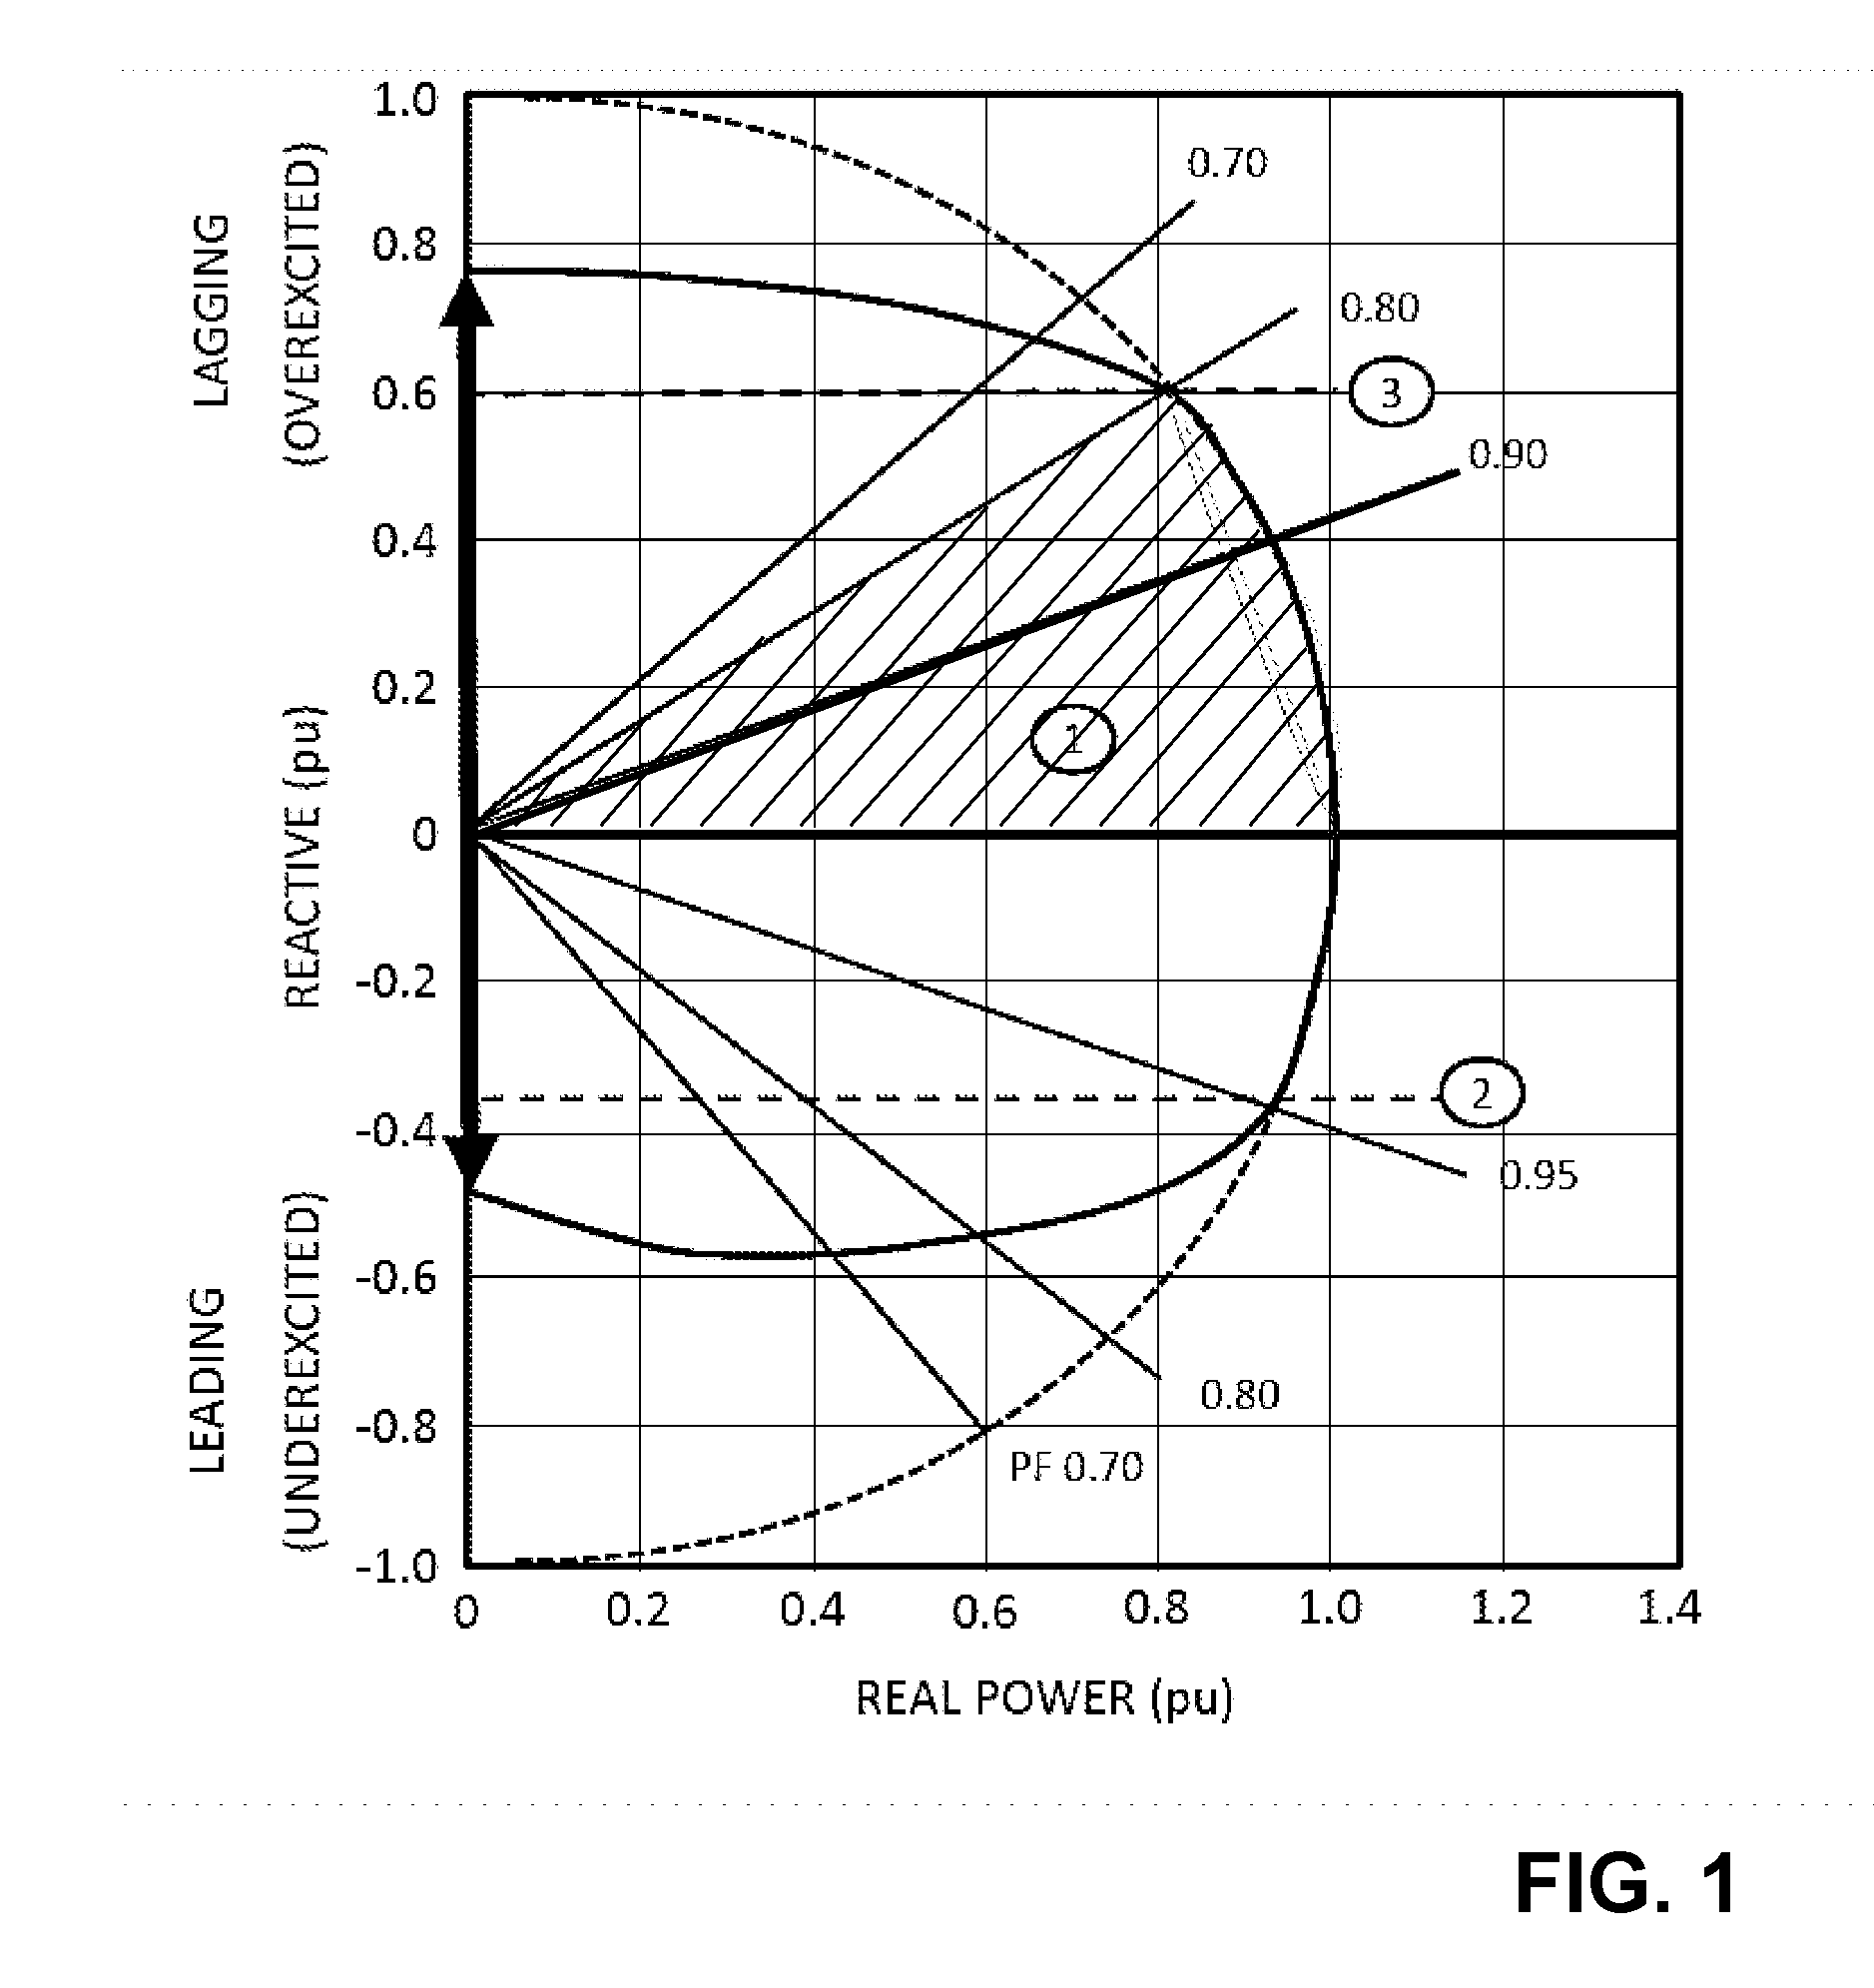 Prime mover generator system for simultaneous synchronous generator and condenser duties